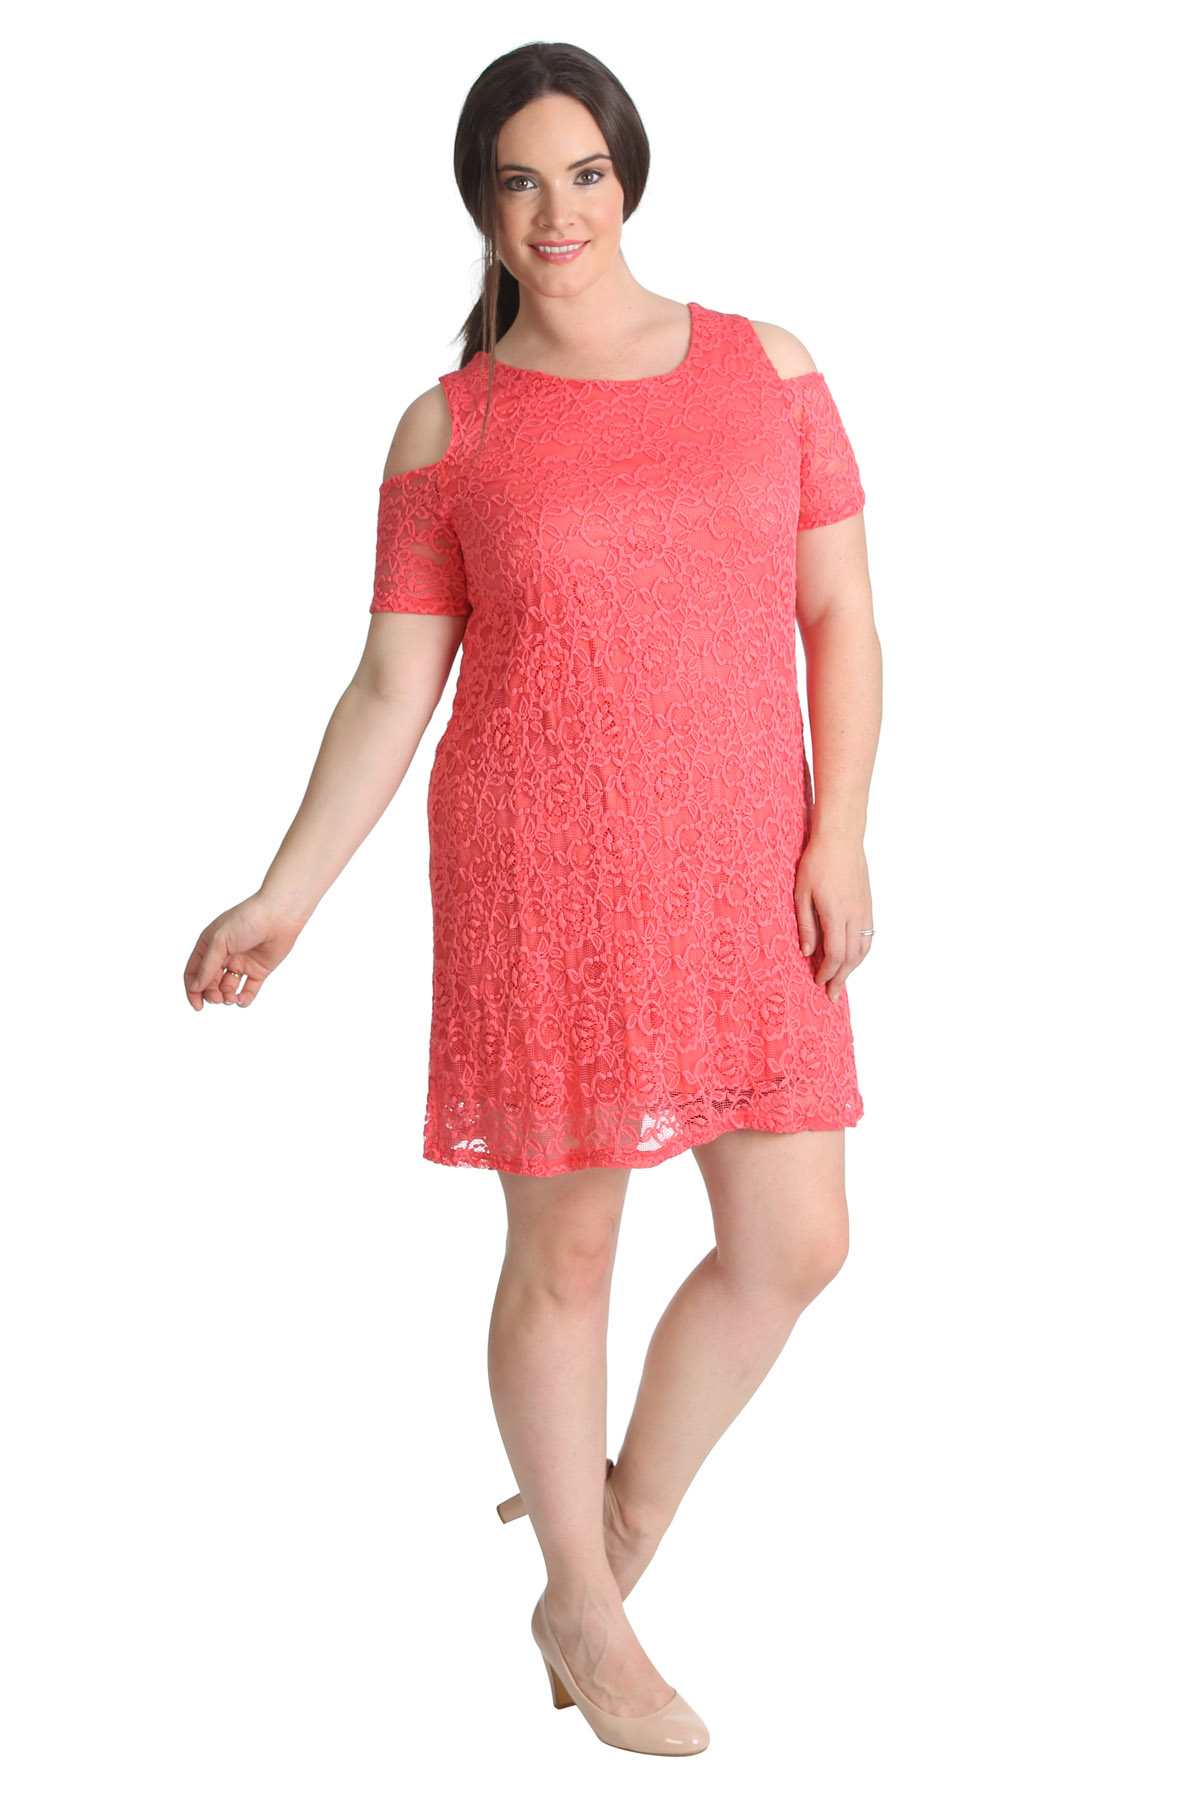 Womens dress how plus size bed